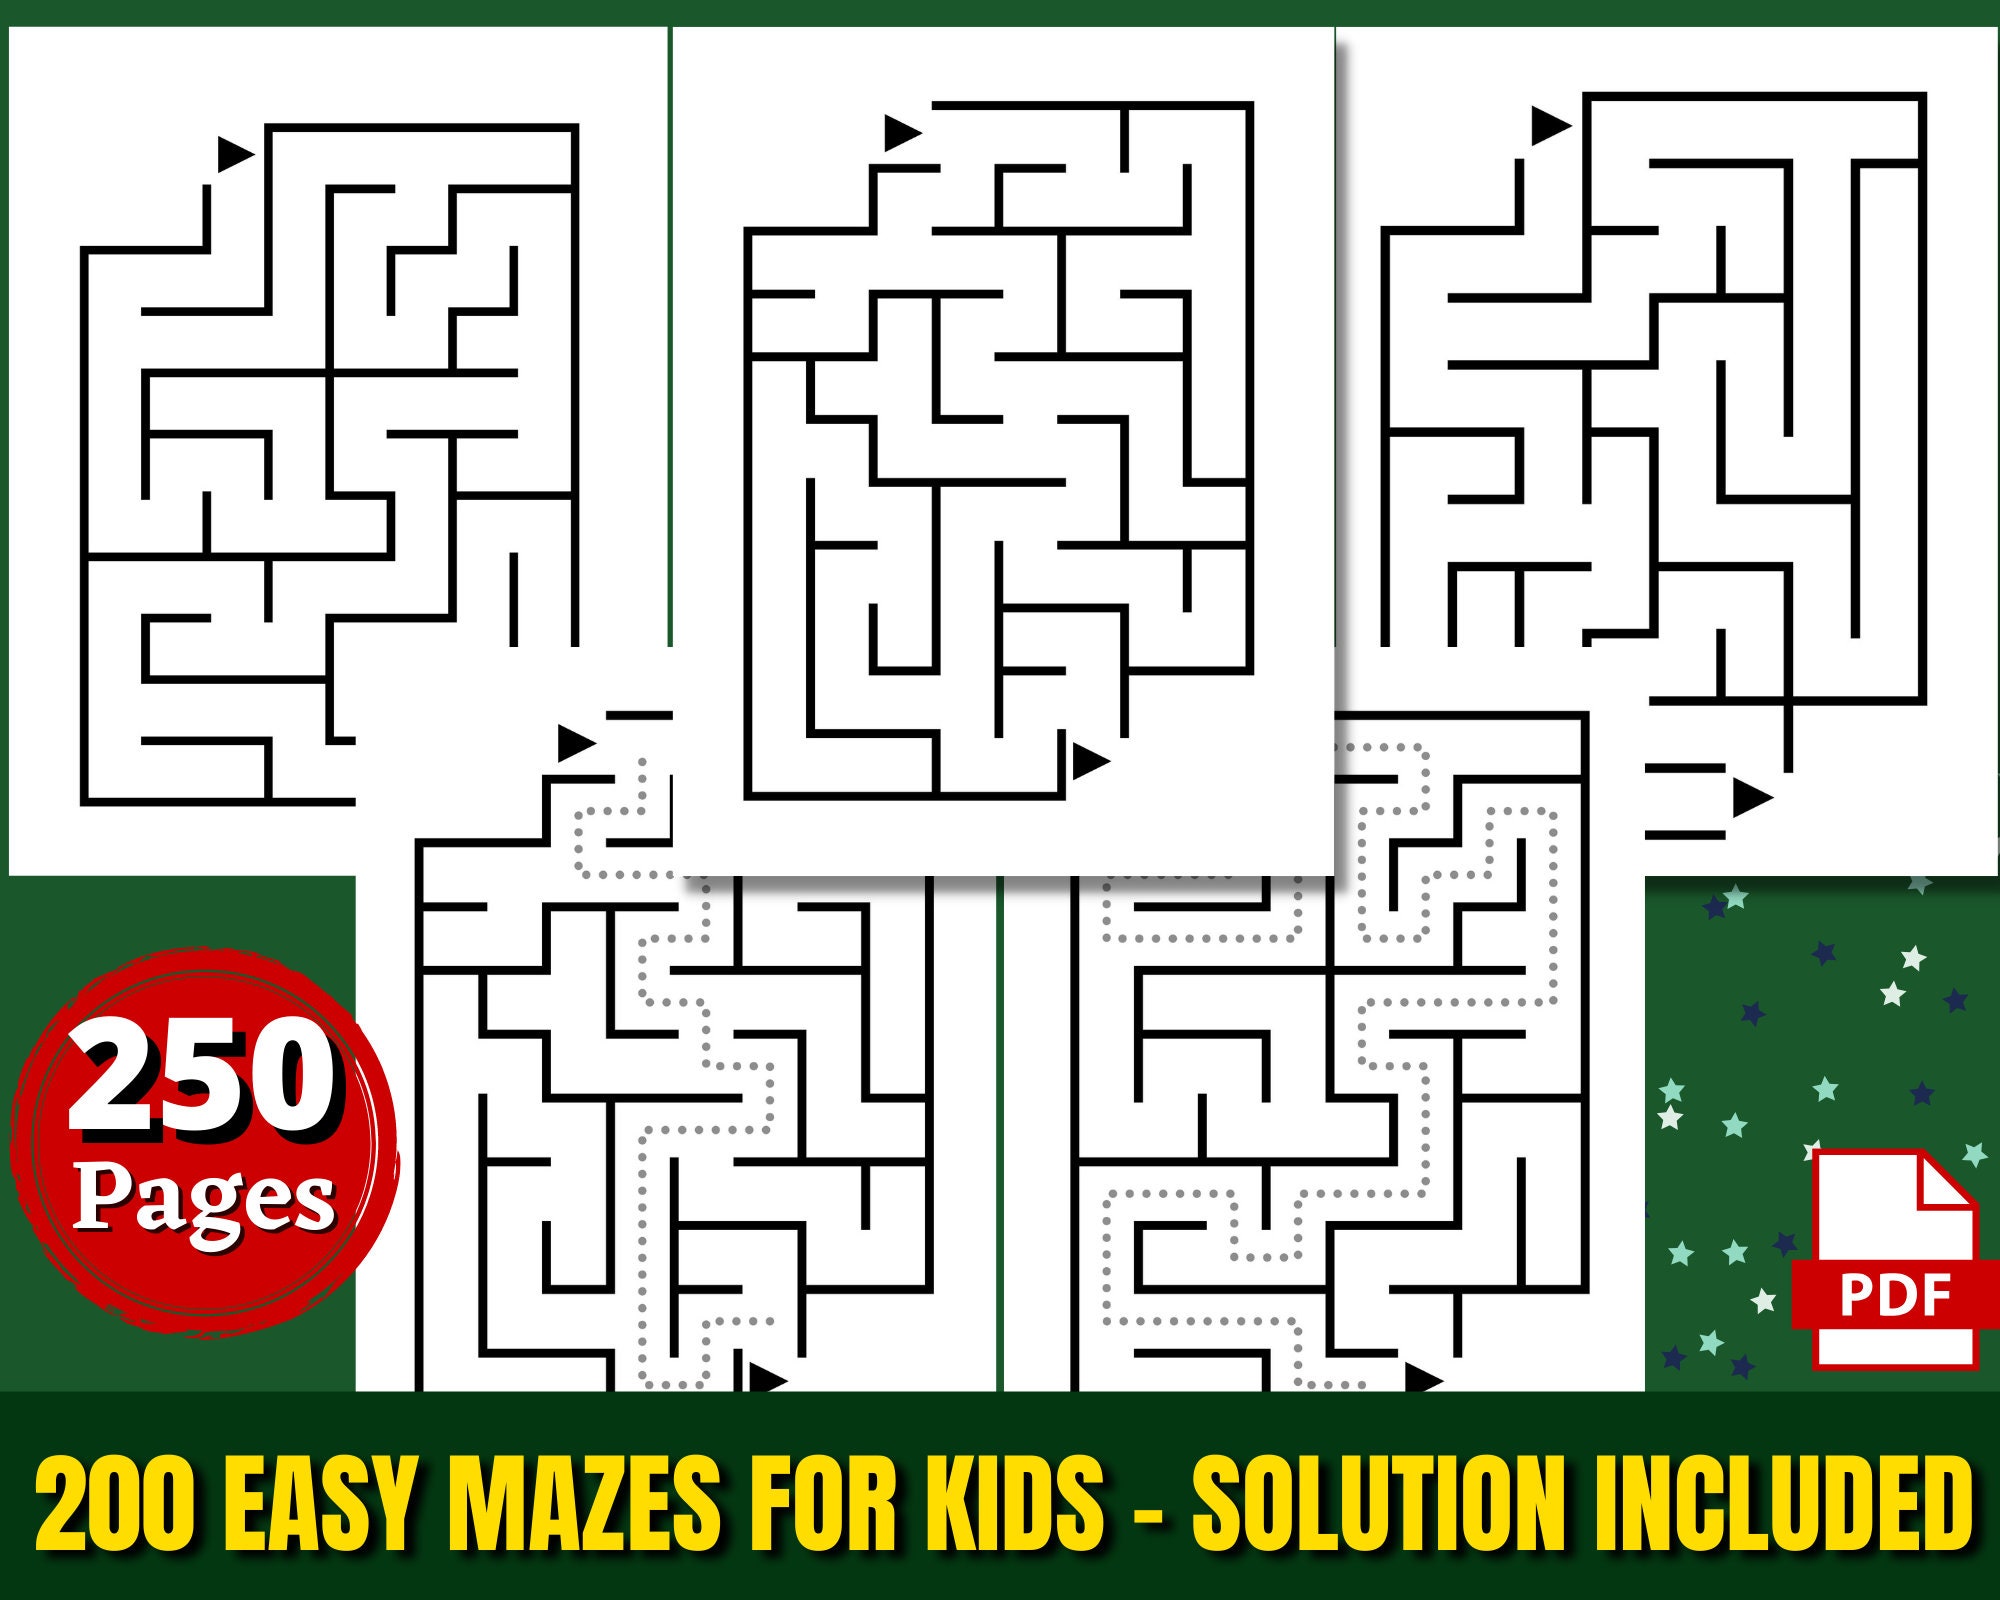 Kids Grilled Cheese Mazes Age 4-6: A Maze Activity Book for Kids